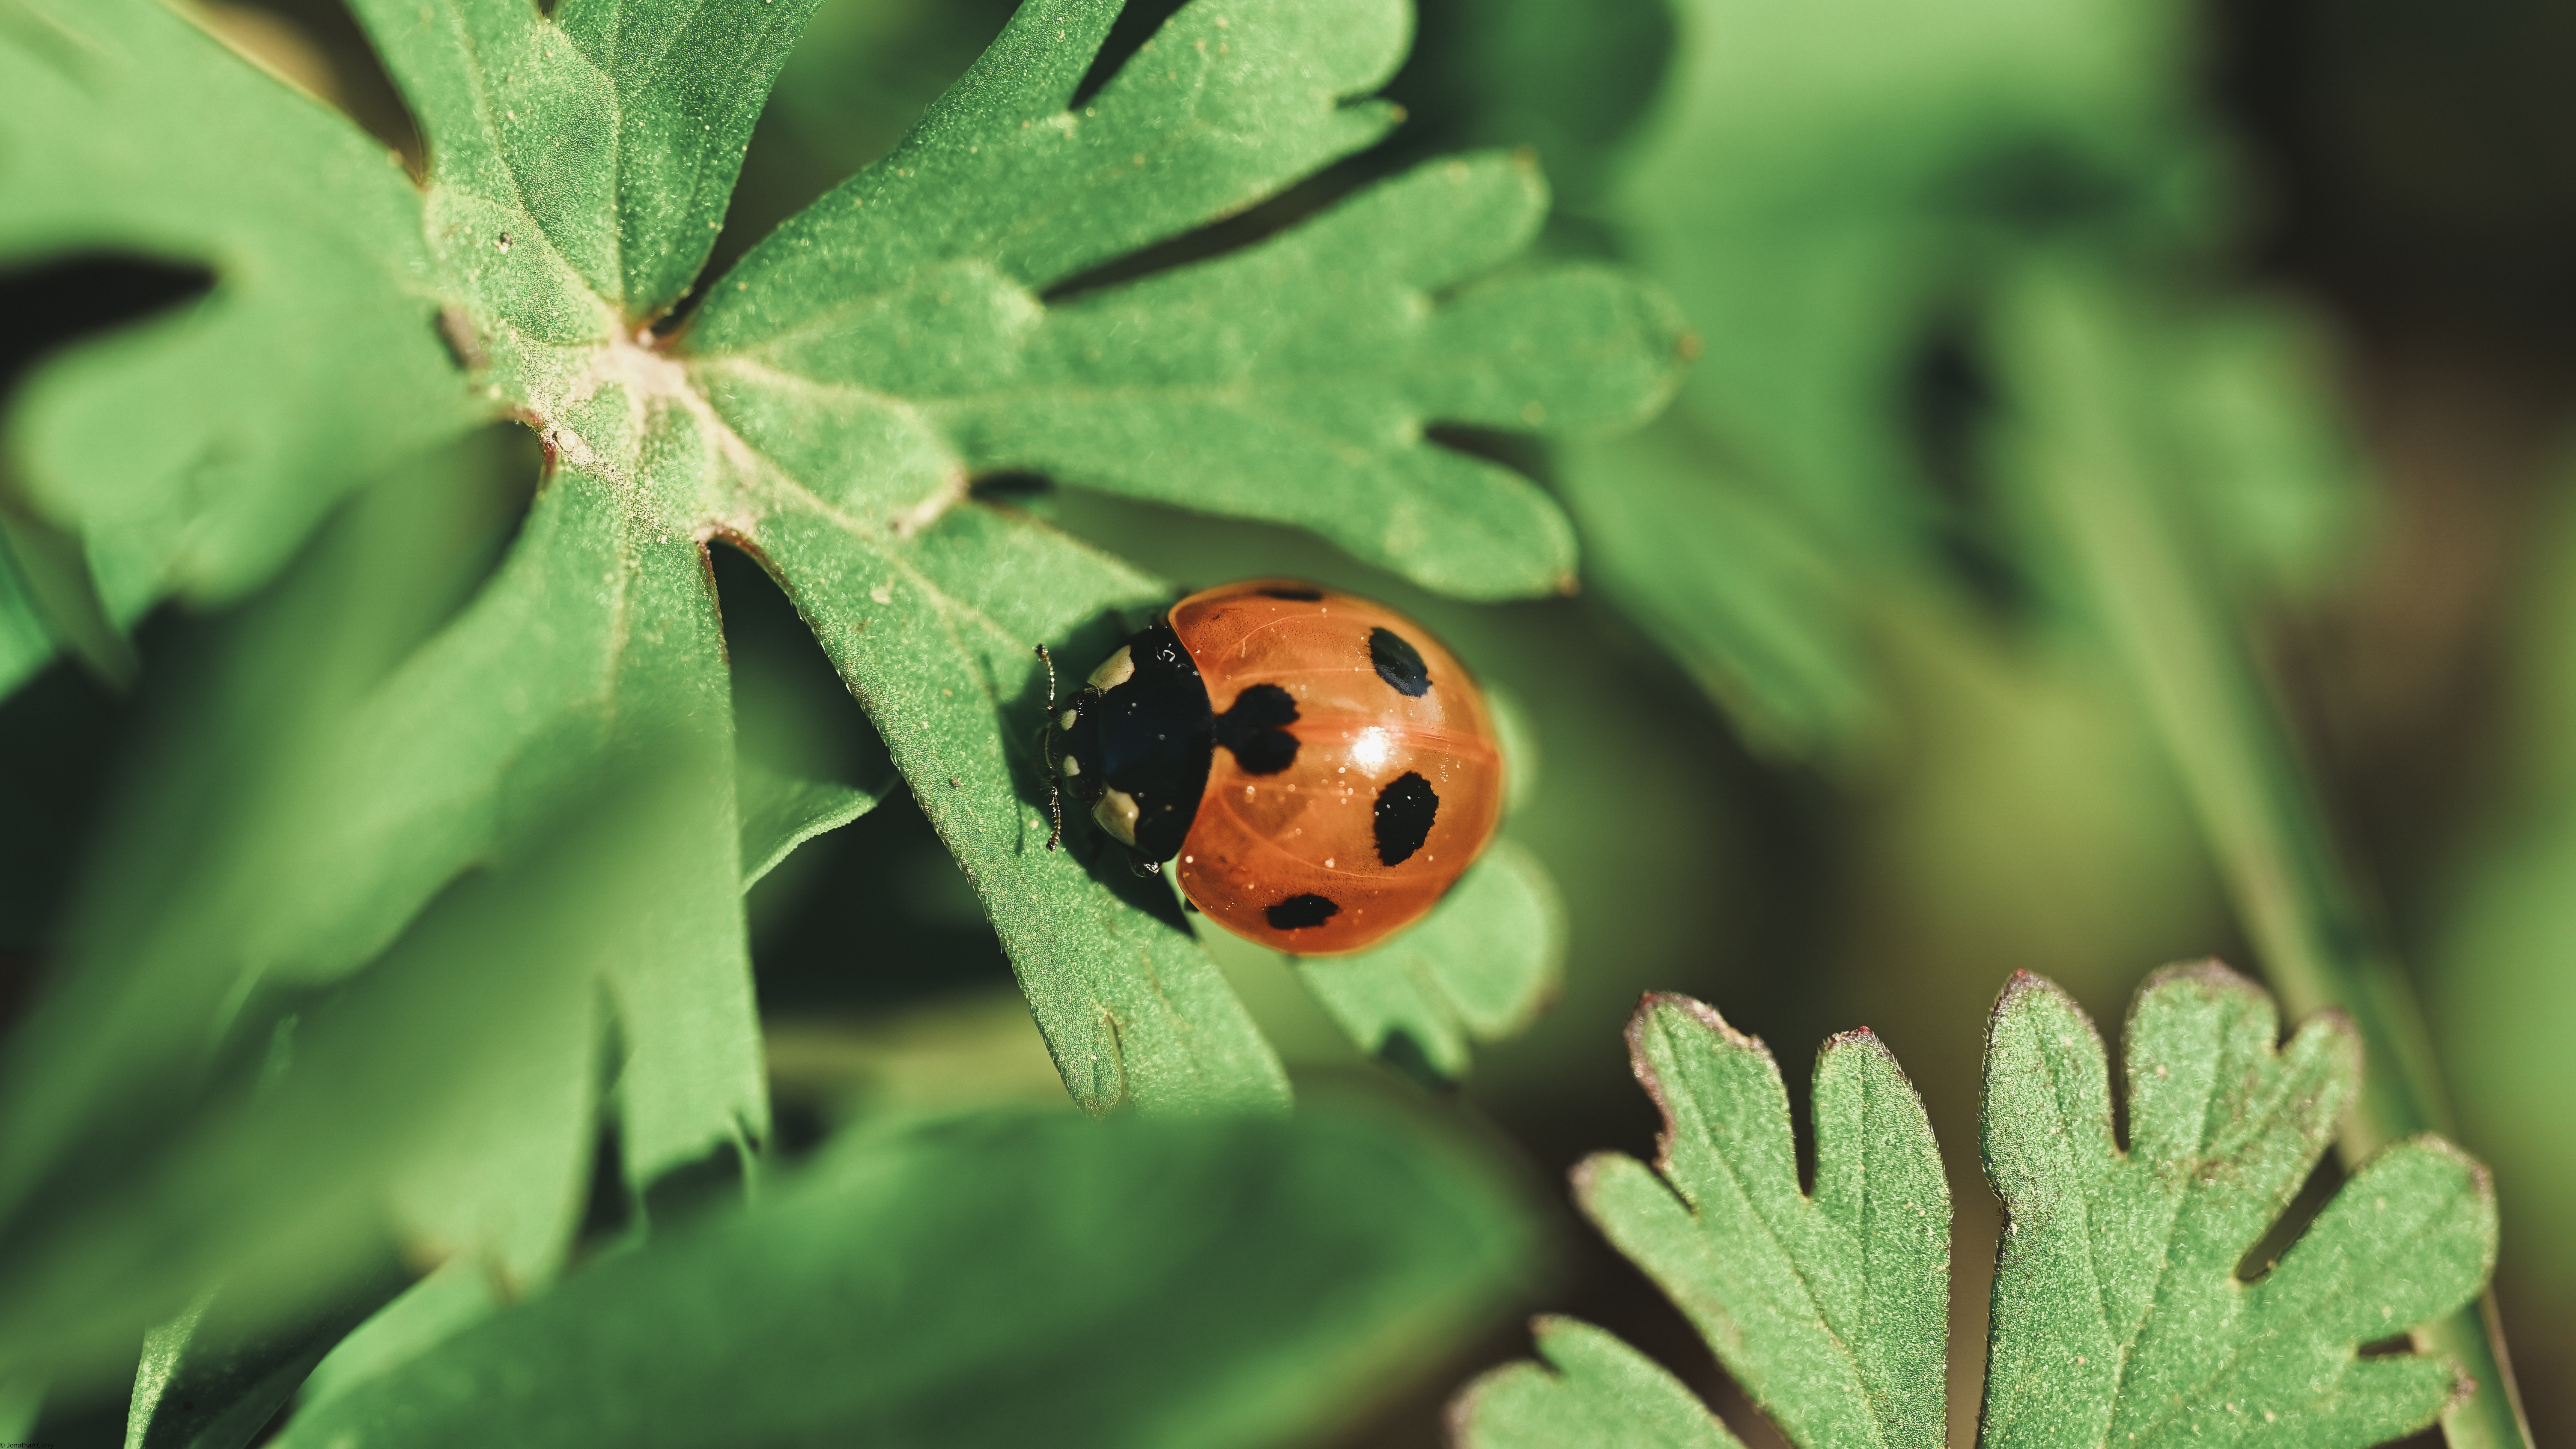 Jonathan Curry Nature Macro Photography Plants Insect Bug Ladybugs Outdoors Leaves 6016x3384